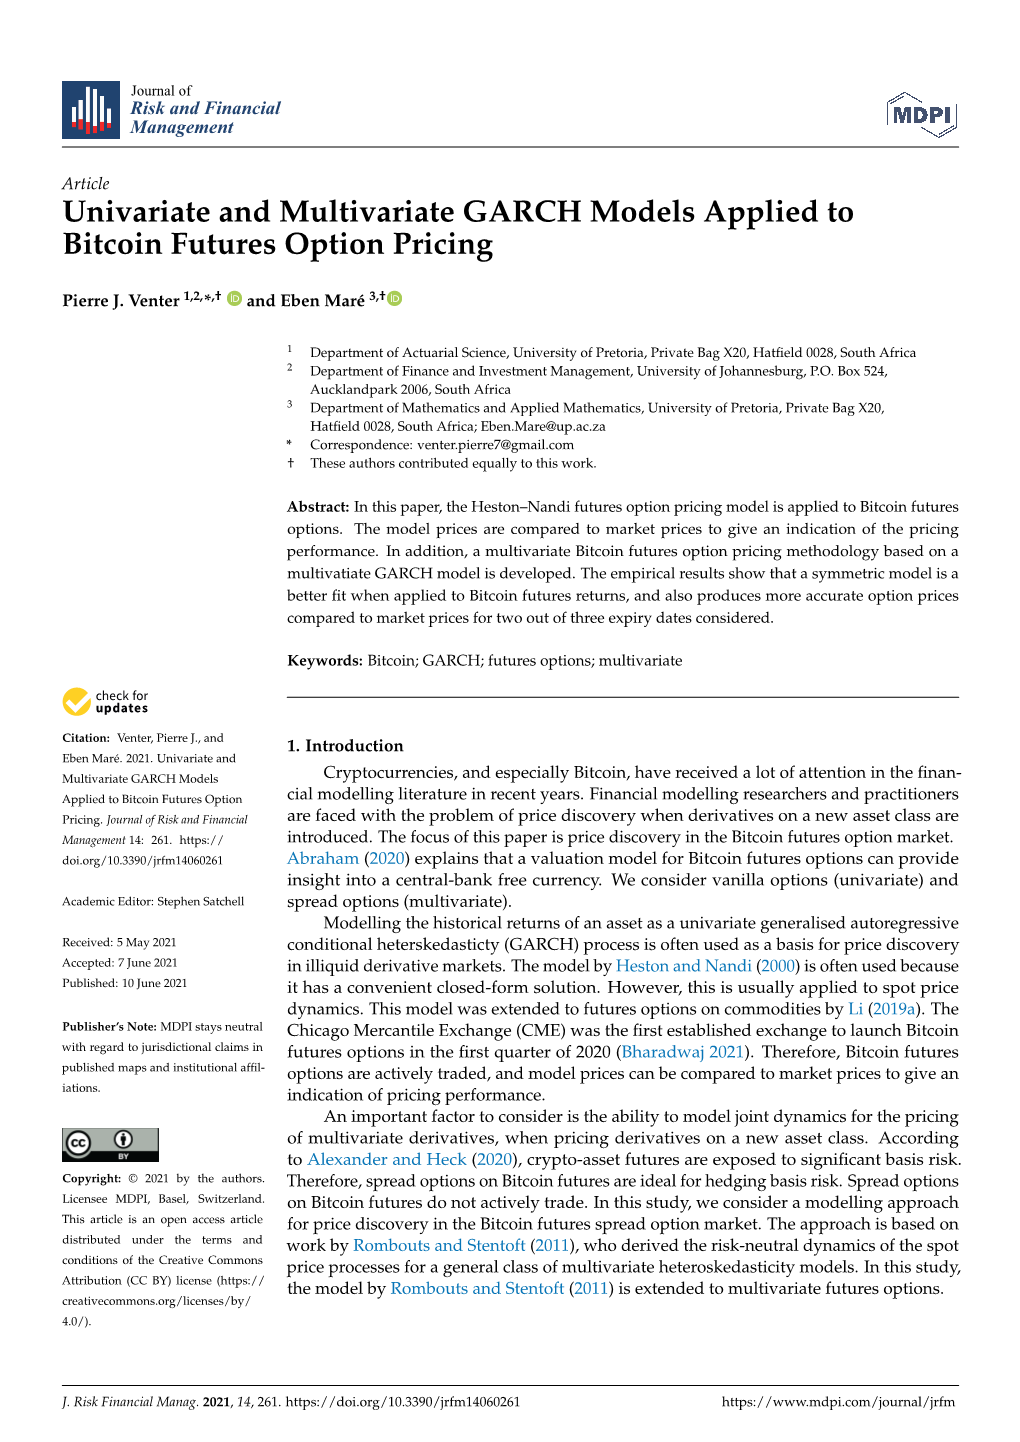 Univariate and Multivariate GARCH Models Applied to Bitcoin Futures Option Pricing